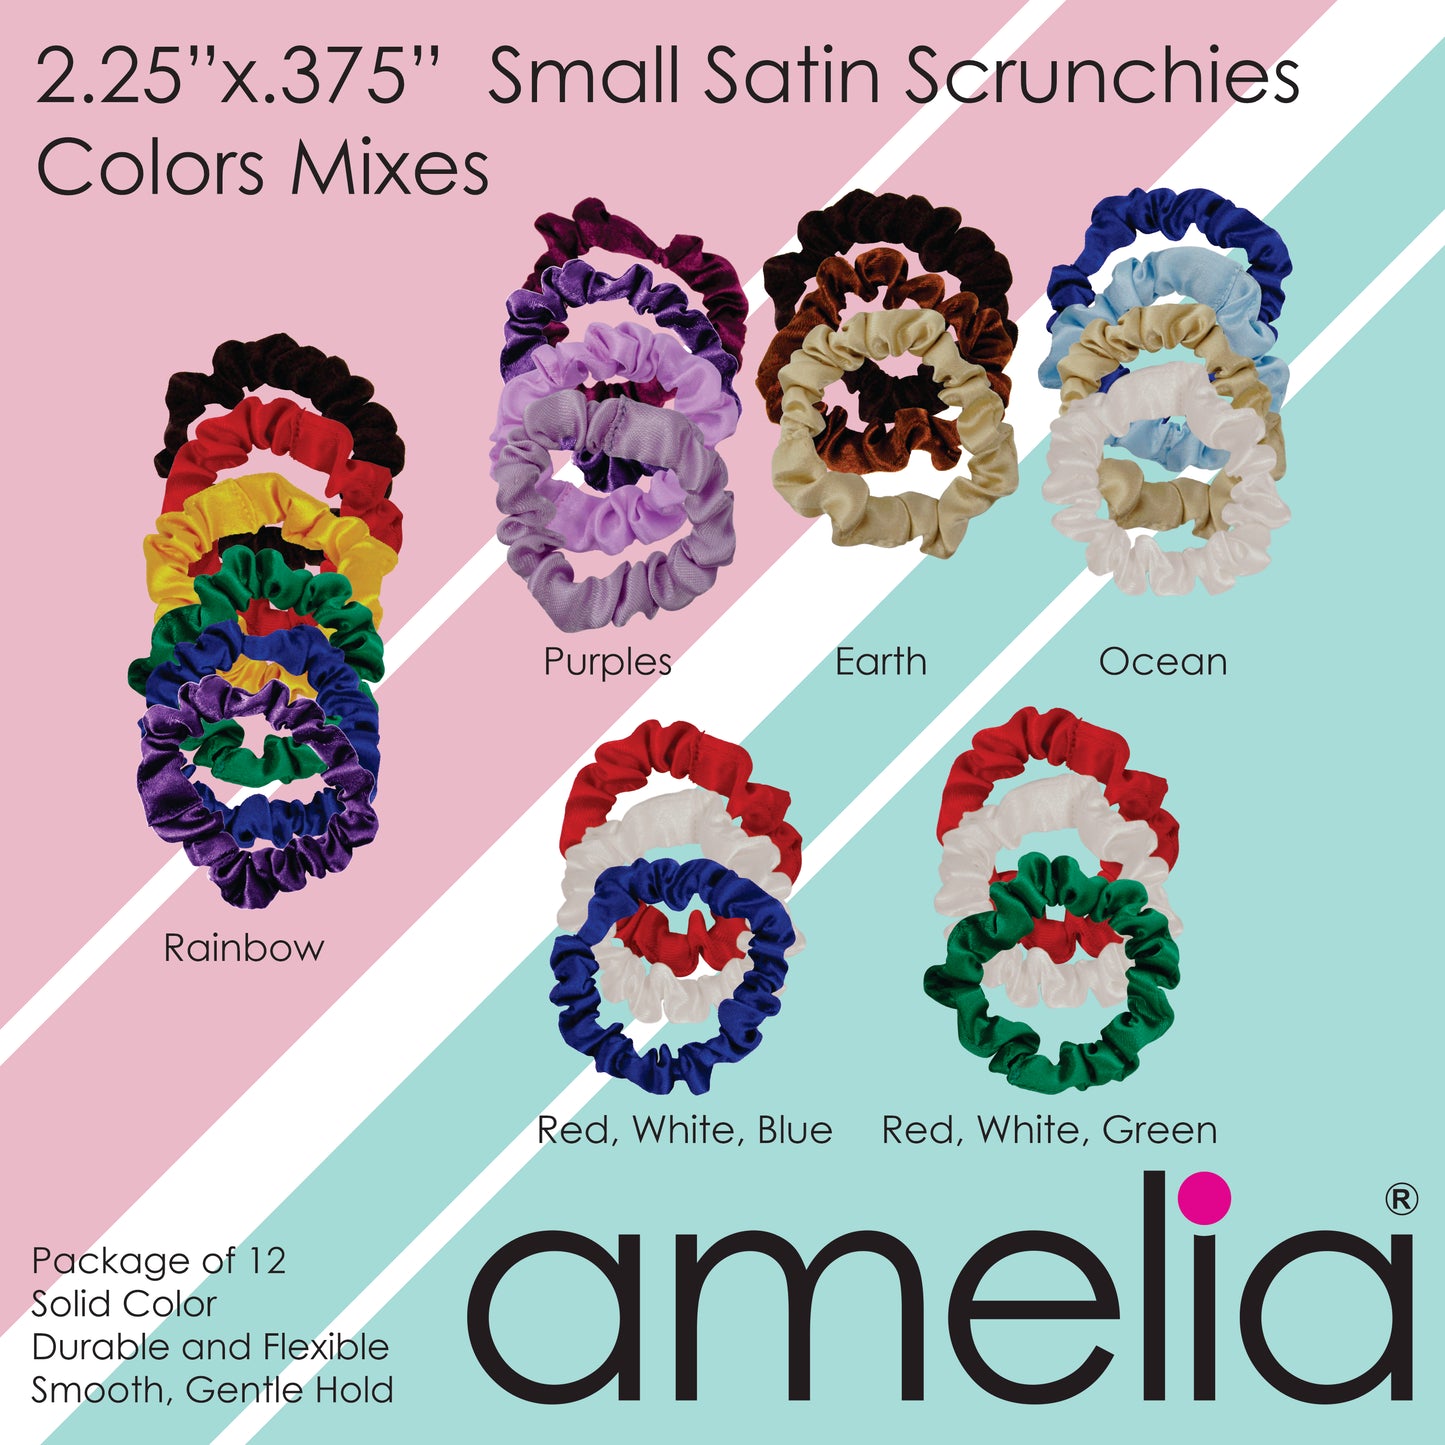 Amelia Beauty, Red, White and Green Satin Scrunchies, 2.25in Diameter, Gentle on Hair, Strong Hold, No Snag, No Dents or Creases. 12 Pack